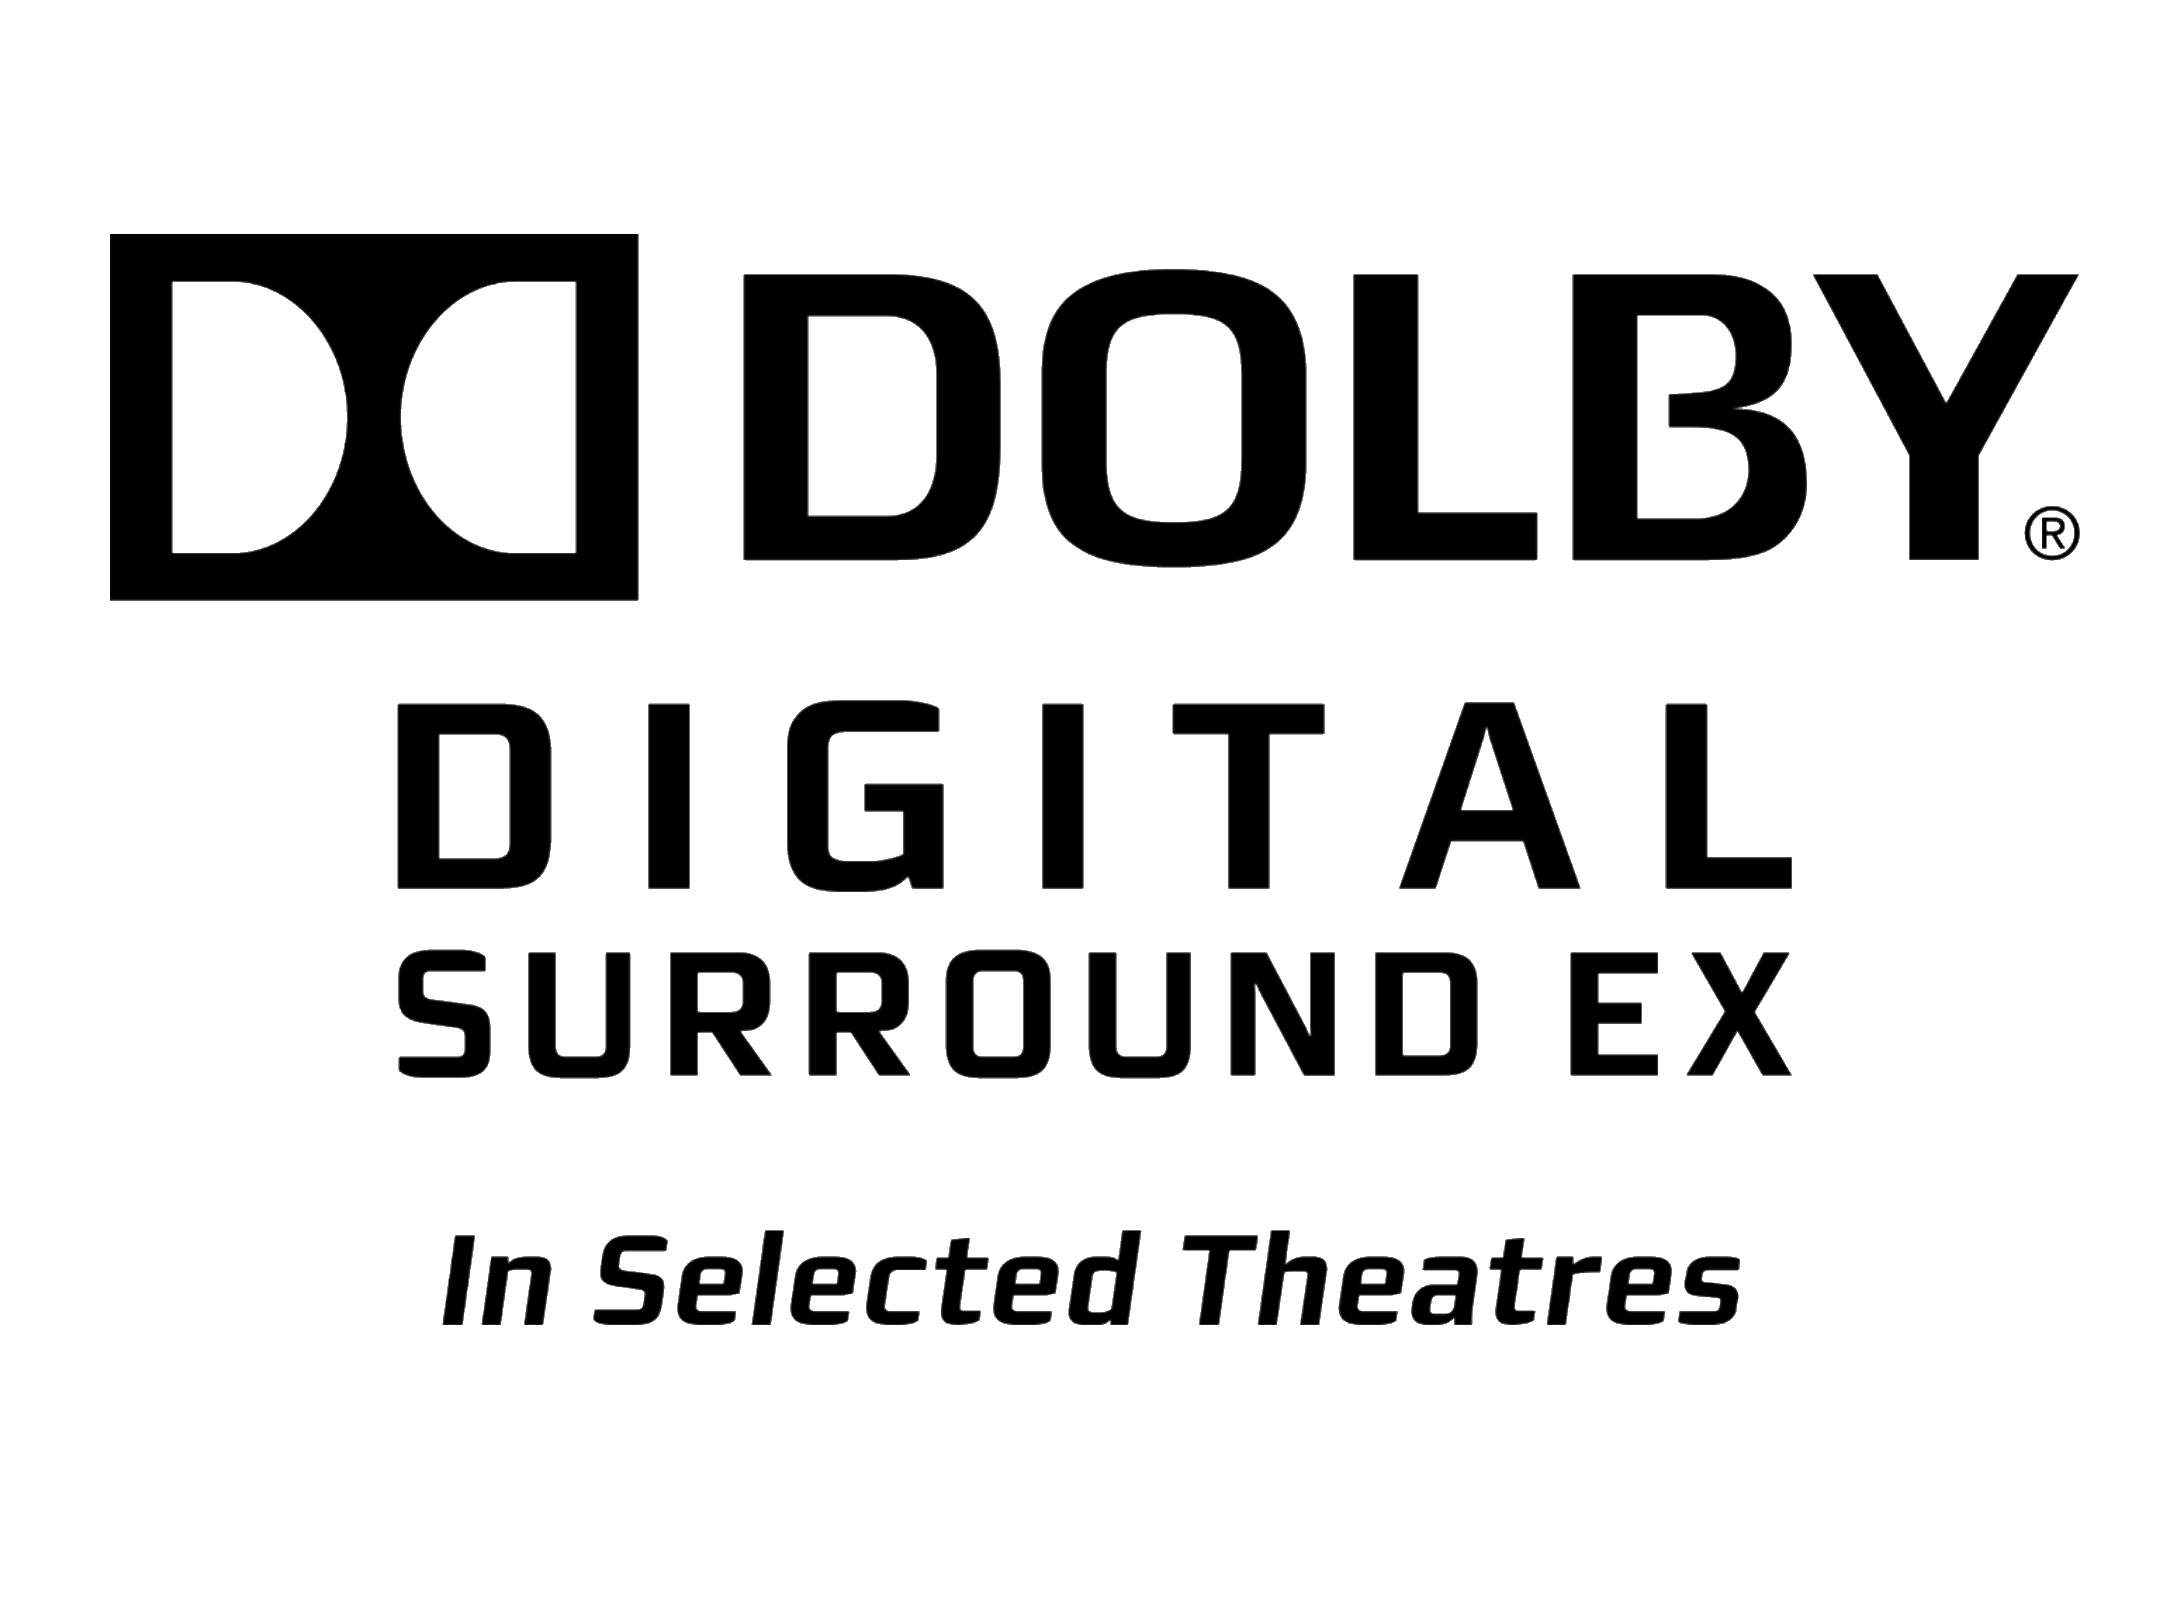 dolby digital surround ex in selected theatres logo